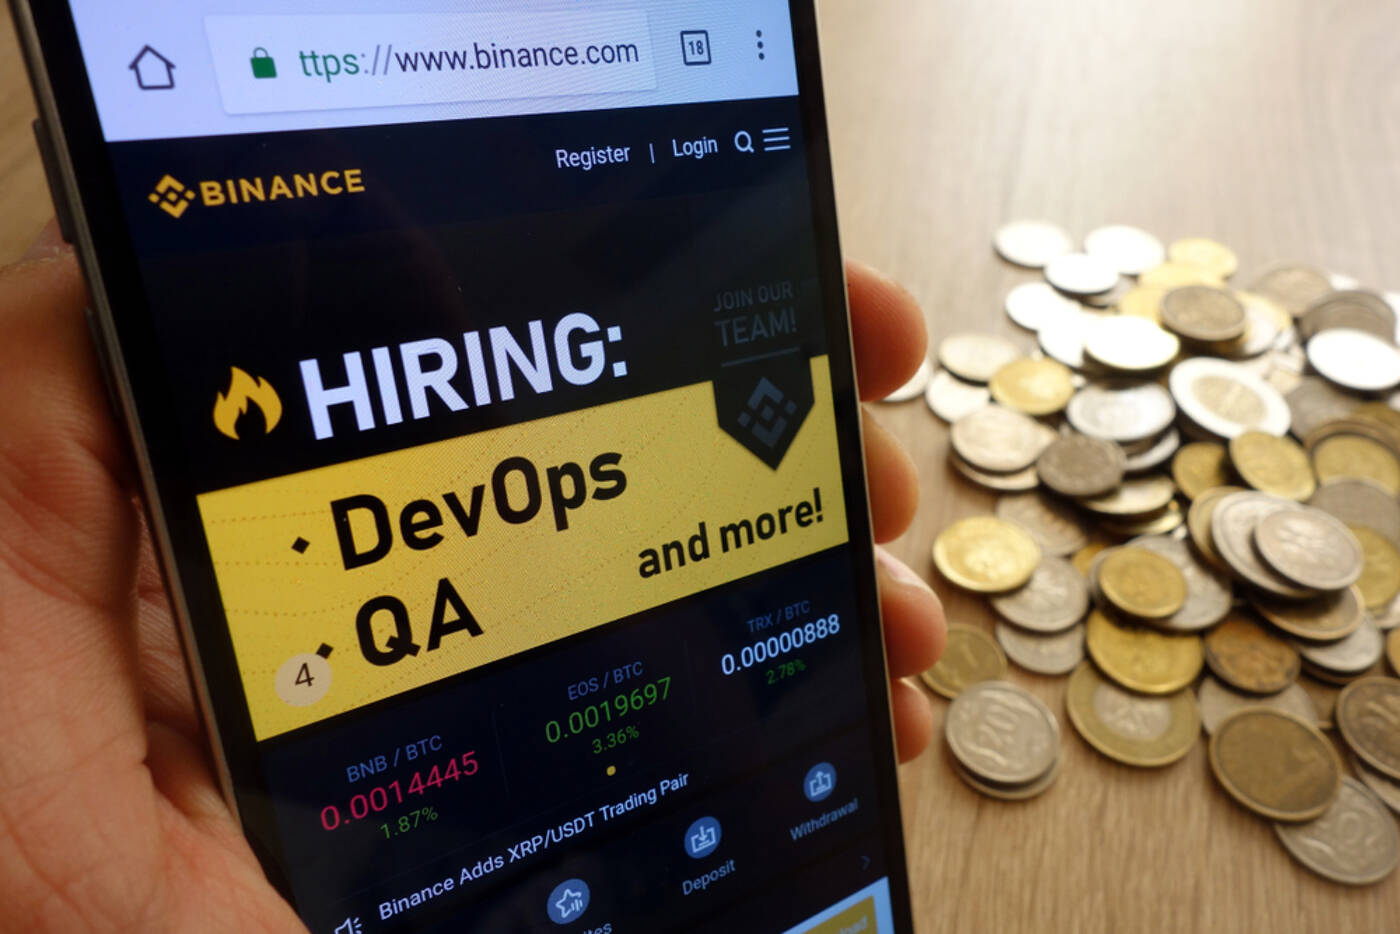 Binance Is Back in the News with New Hires to Target Its Next Growth Drive